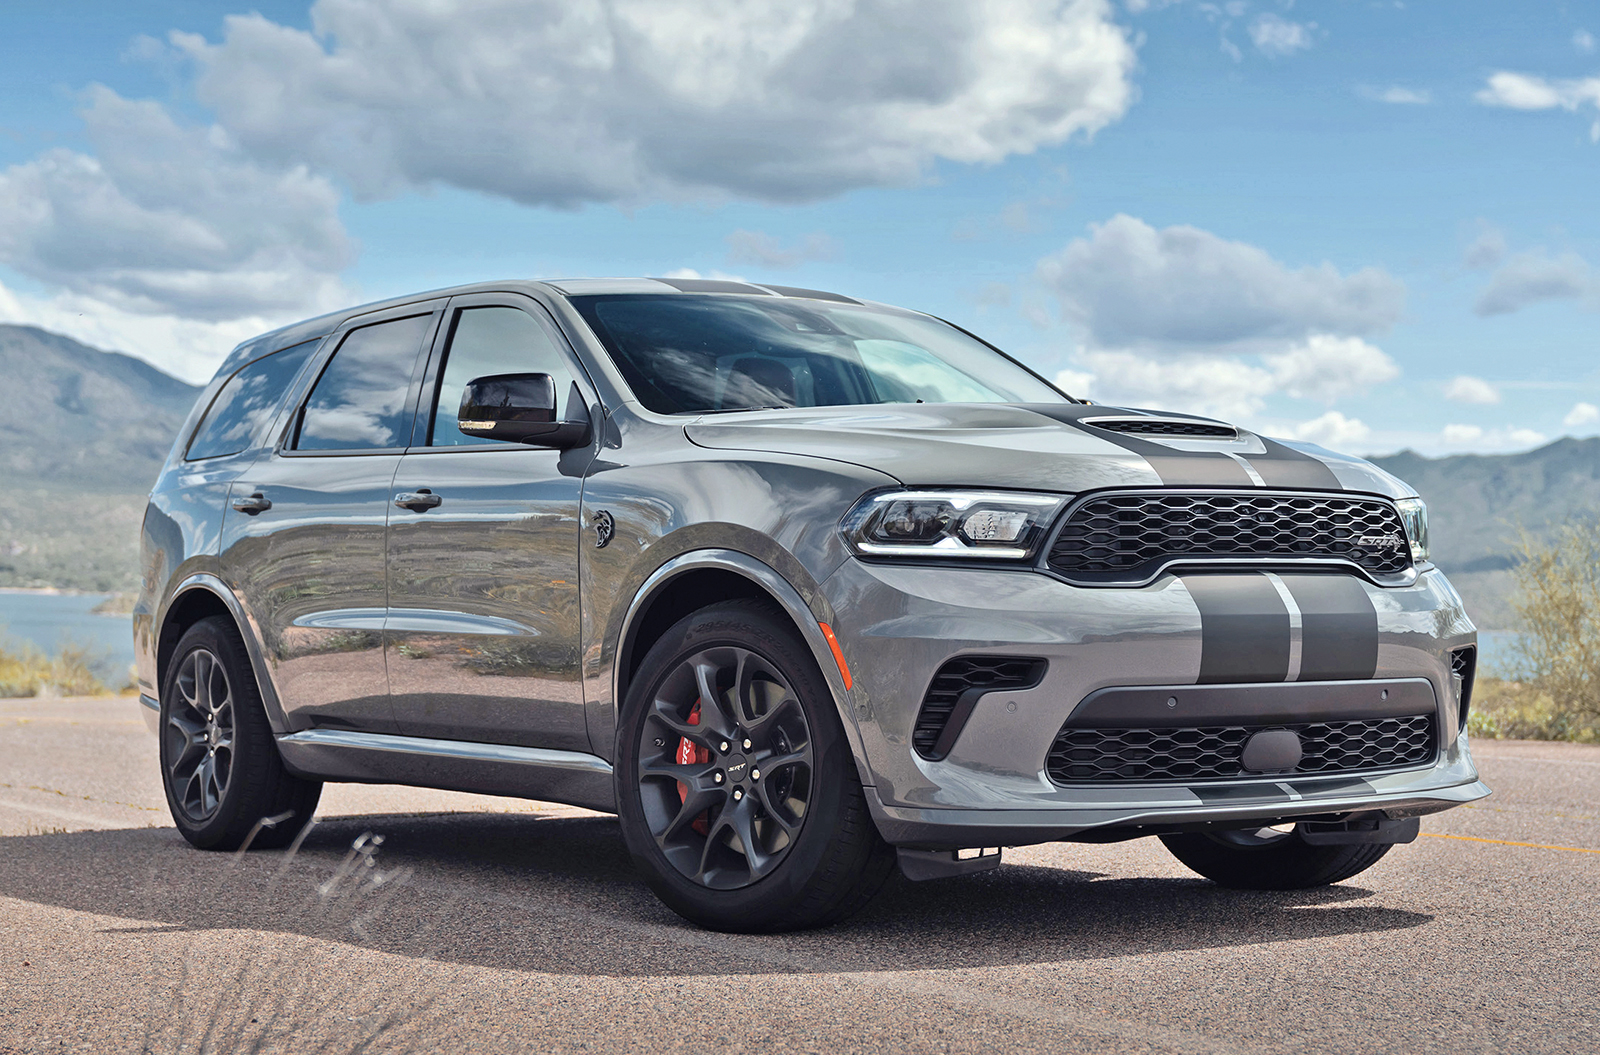 Future Collectibles: 2021 Dodge Durango SRT Hellcat | The Daily Drive | Consumer Guide® The Daily Drive